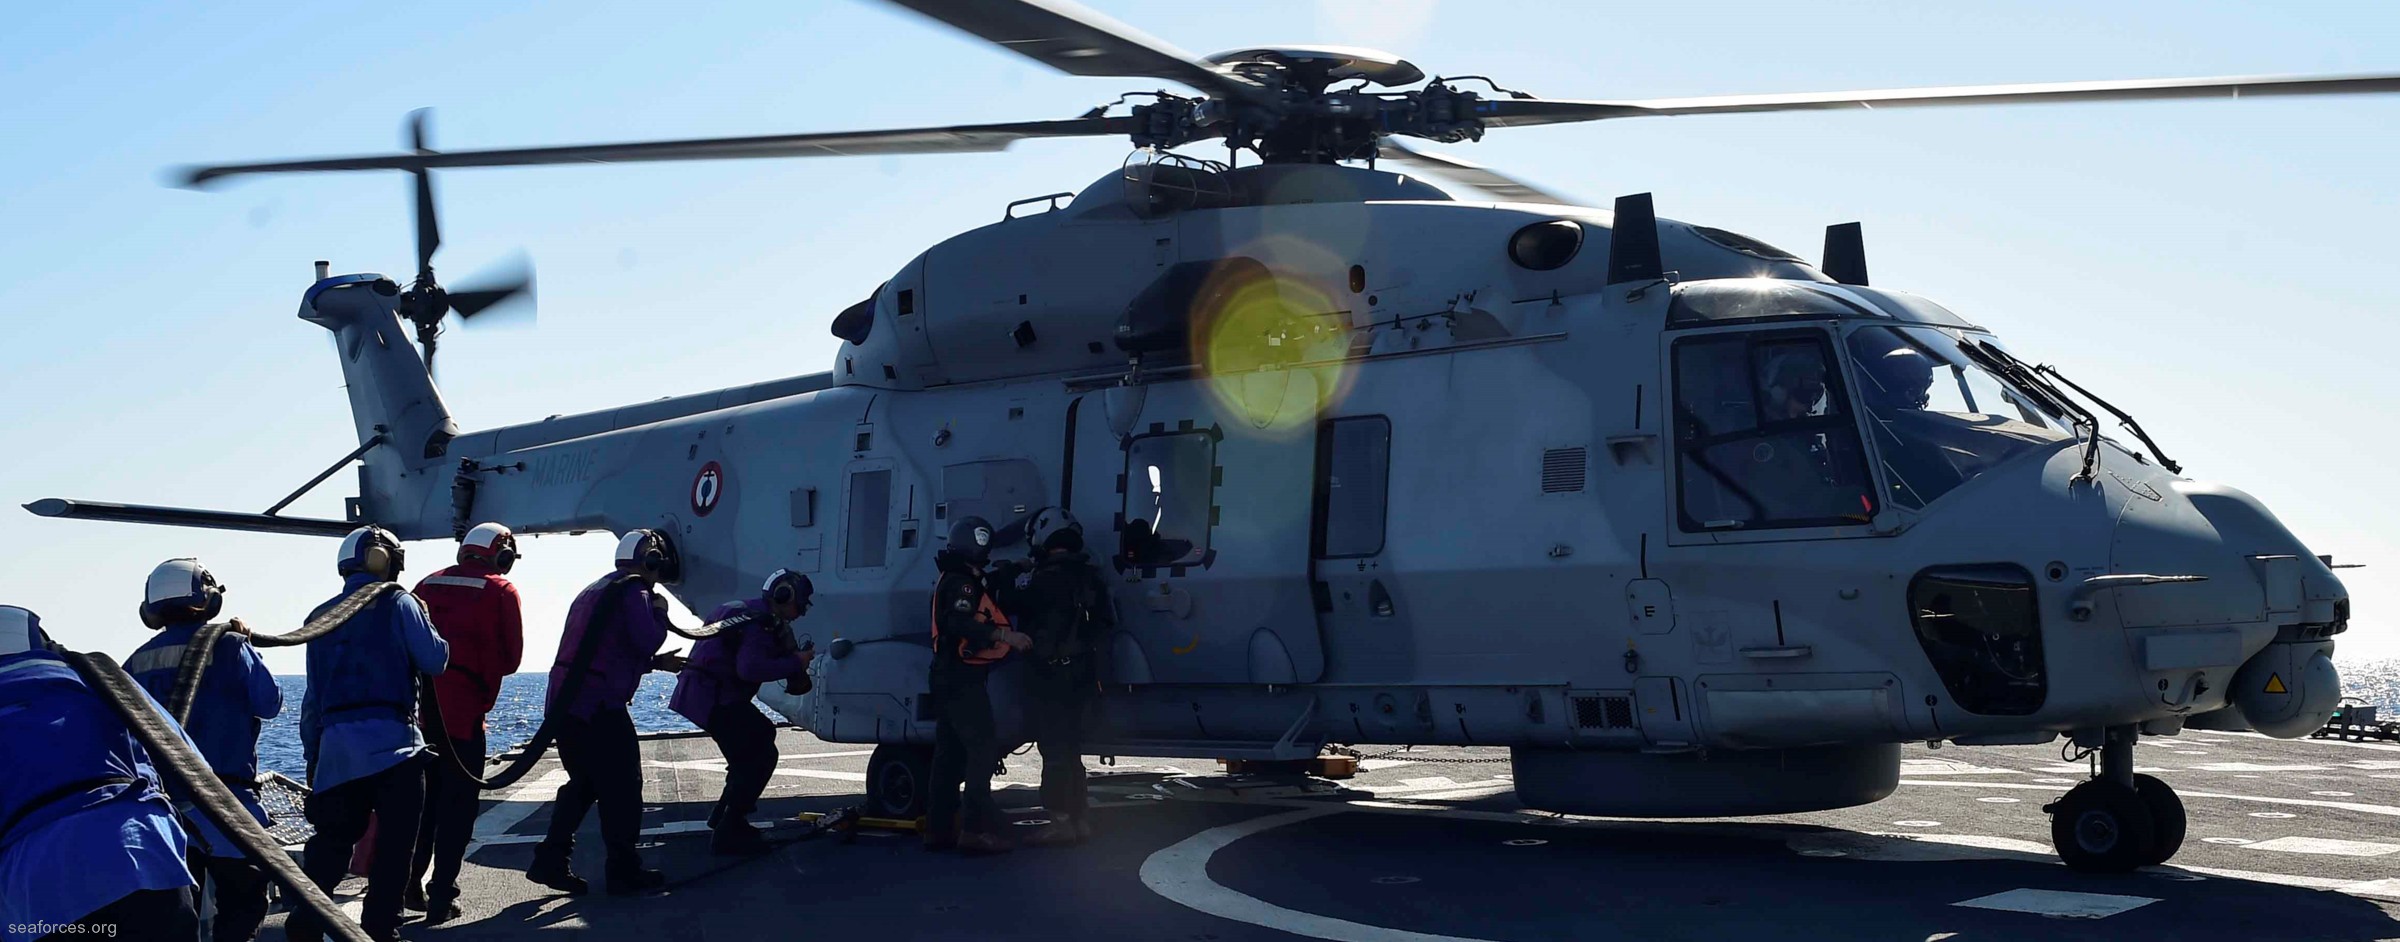 nh90 caiman nfh helicopter french navy marine nationale aeronavale flottille 31f 33f 24